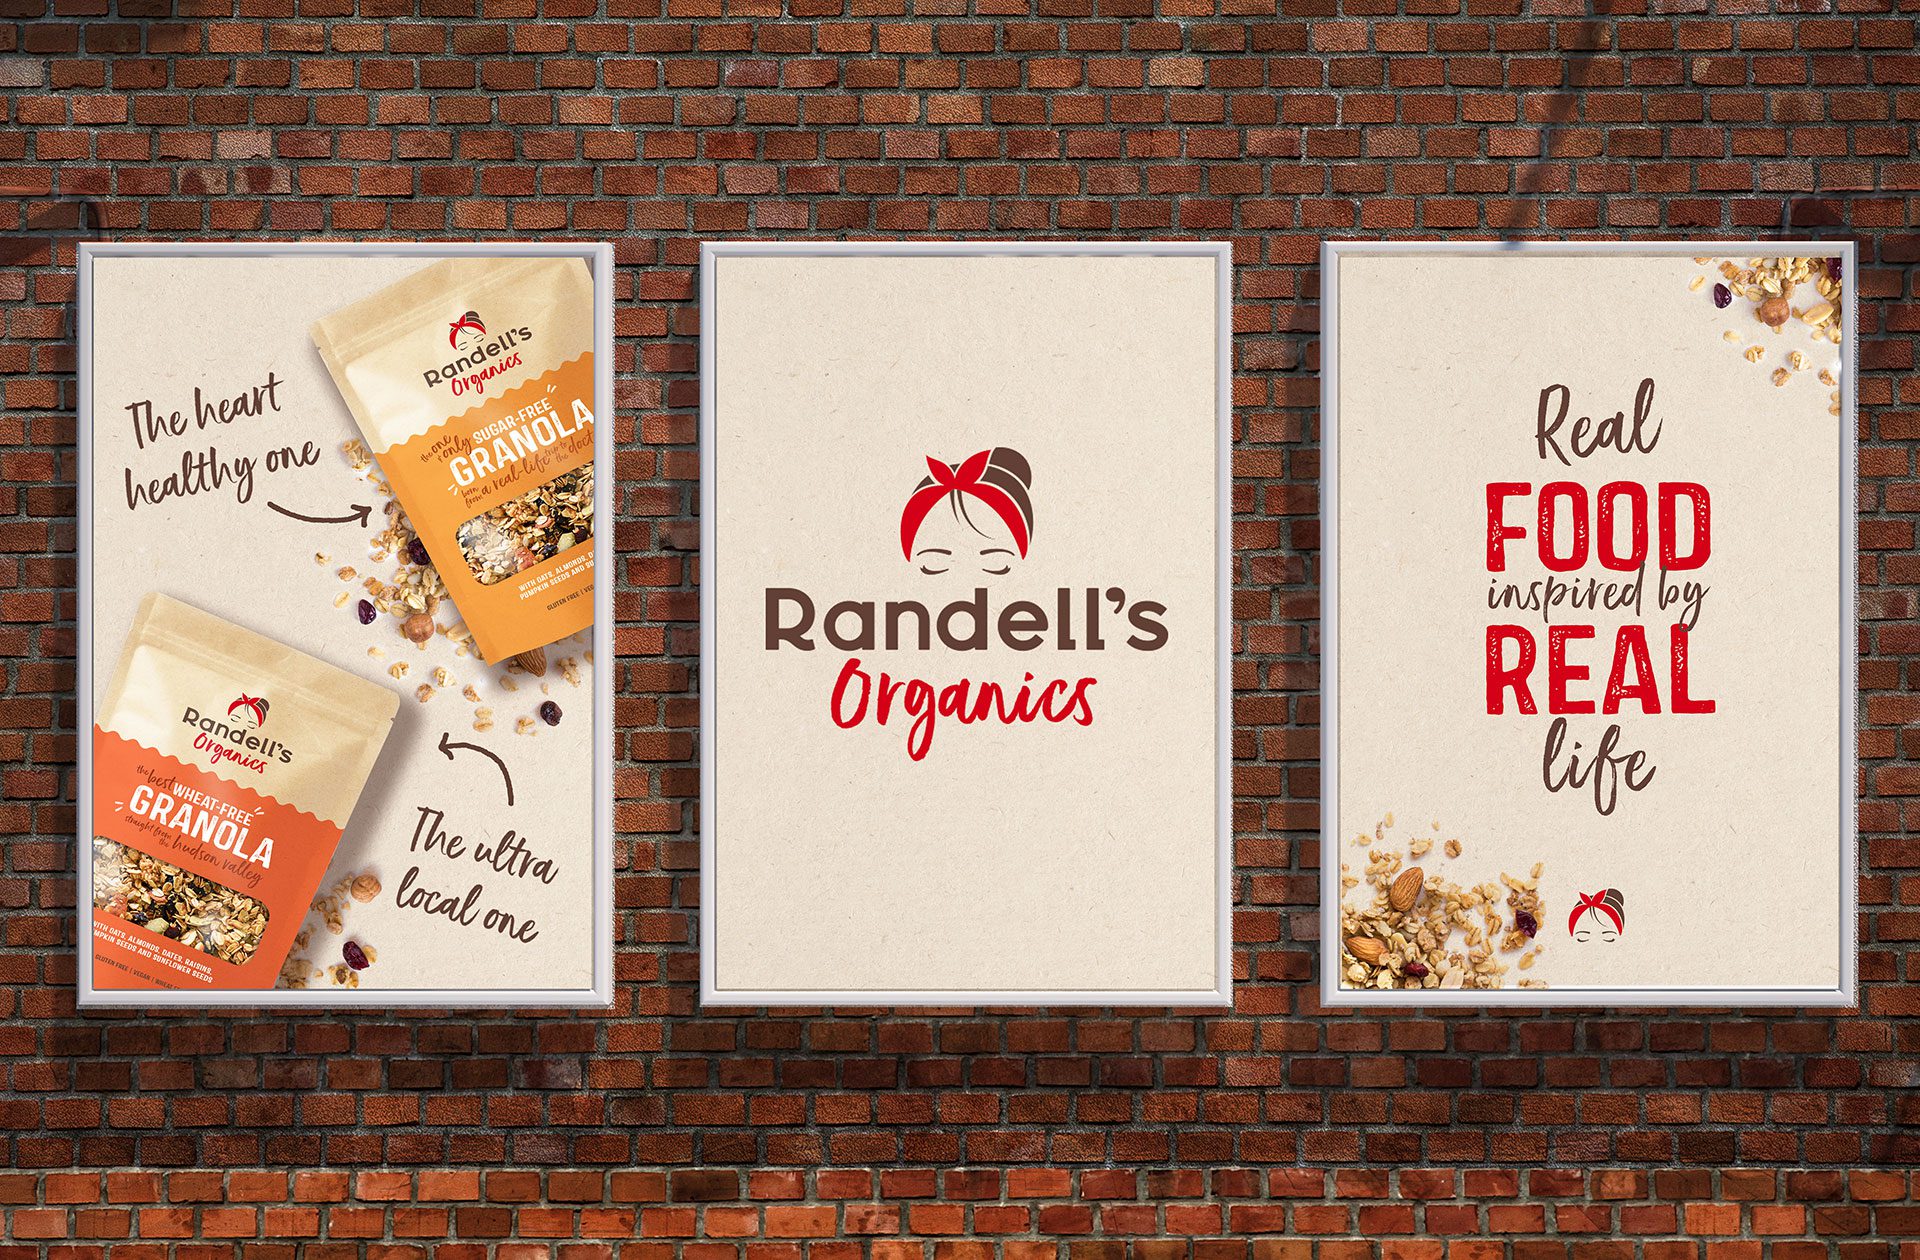 Render of three street bilboard advertisements for startup business Randell’s Organics, showcasing a brand world, logo creation and brand identity design services for consumer packaged goods.